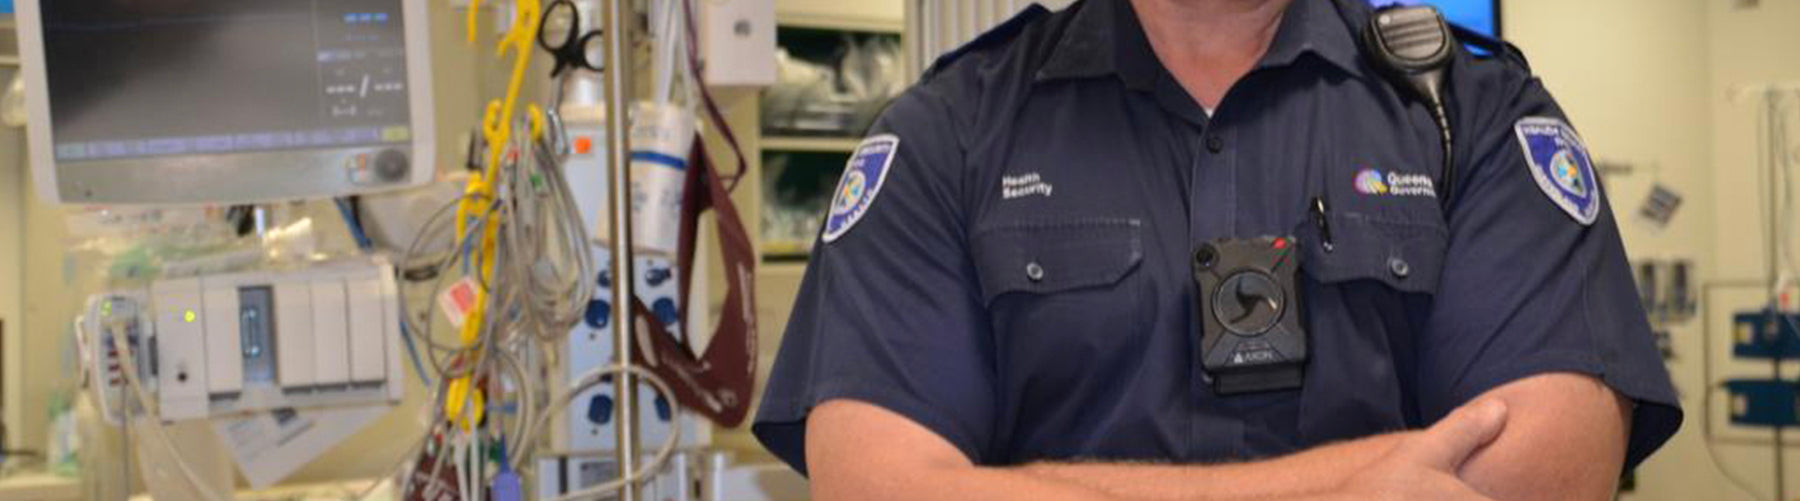 Body Cameras Deter Attacks and Abuse at Hospitals